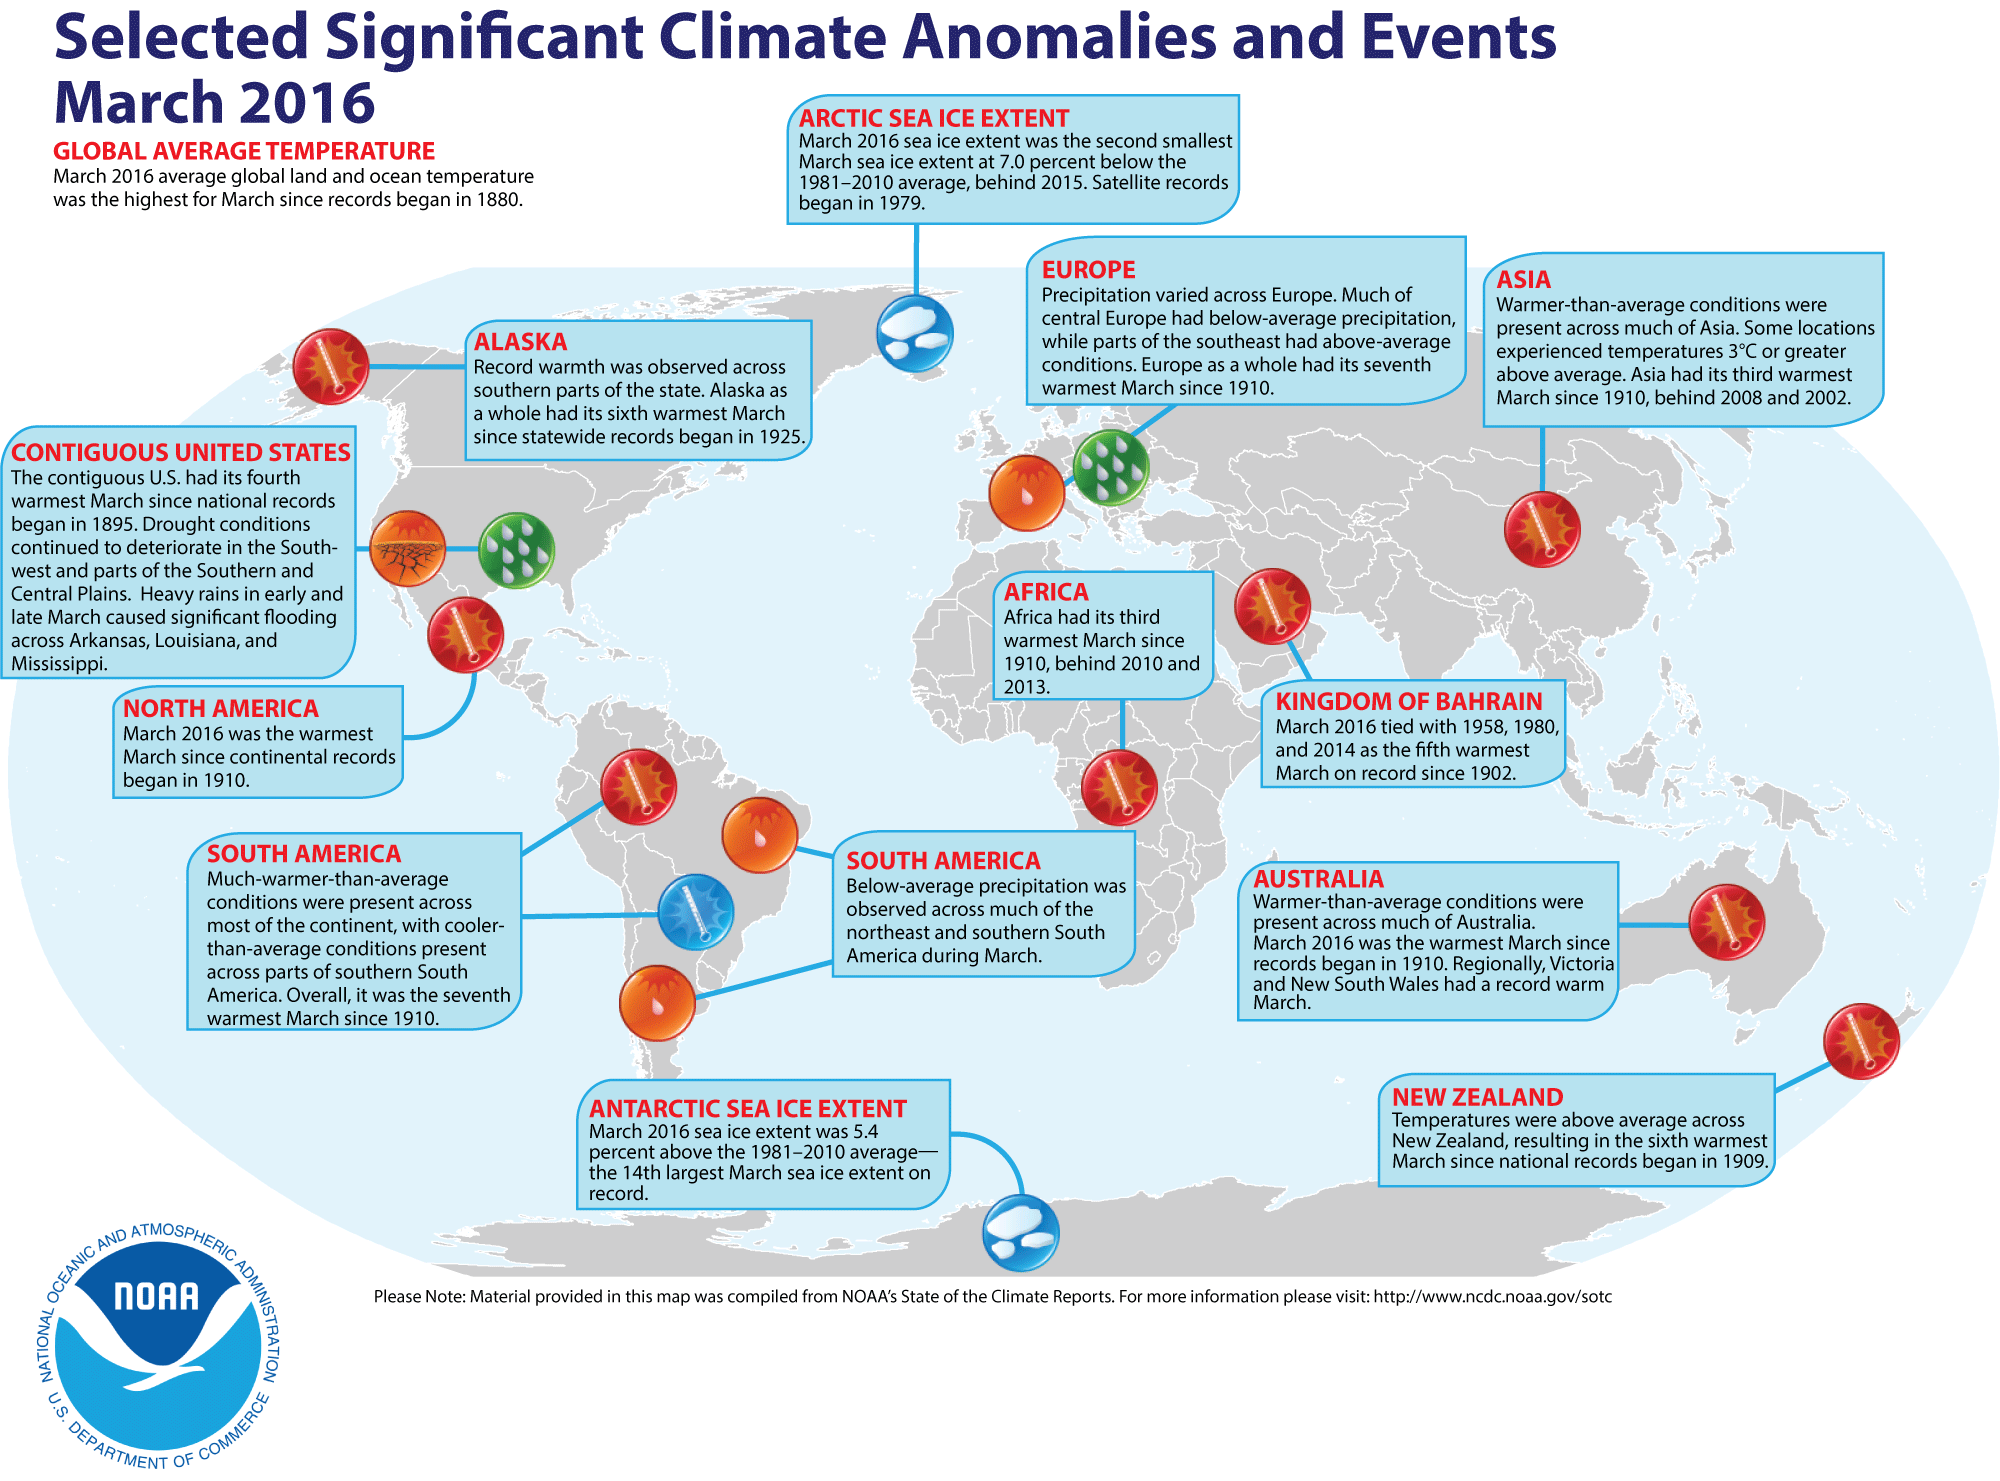 March climate anomalies and events around the world. Credit: NOAA.